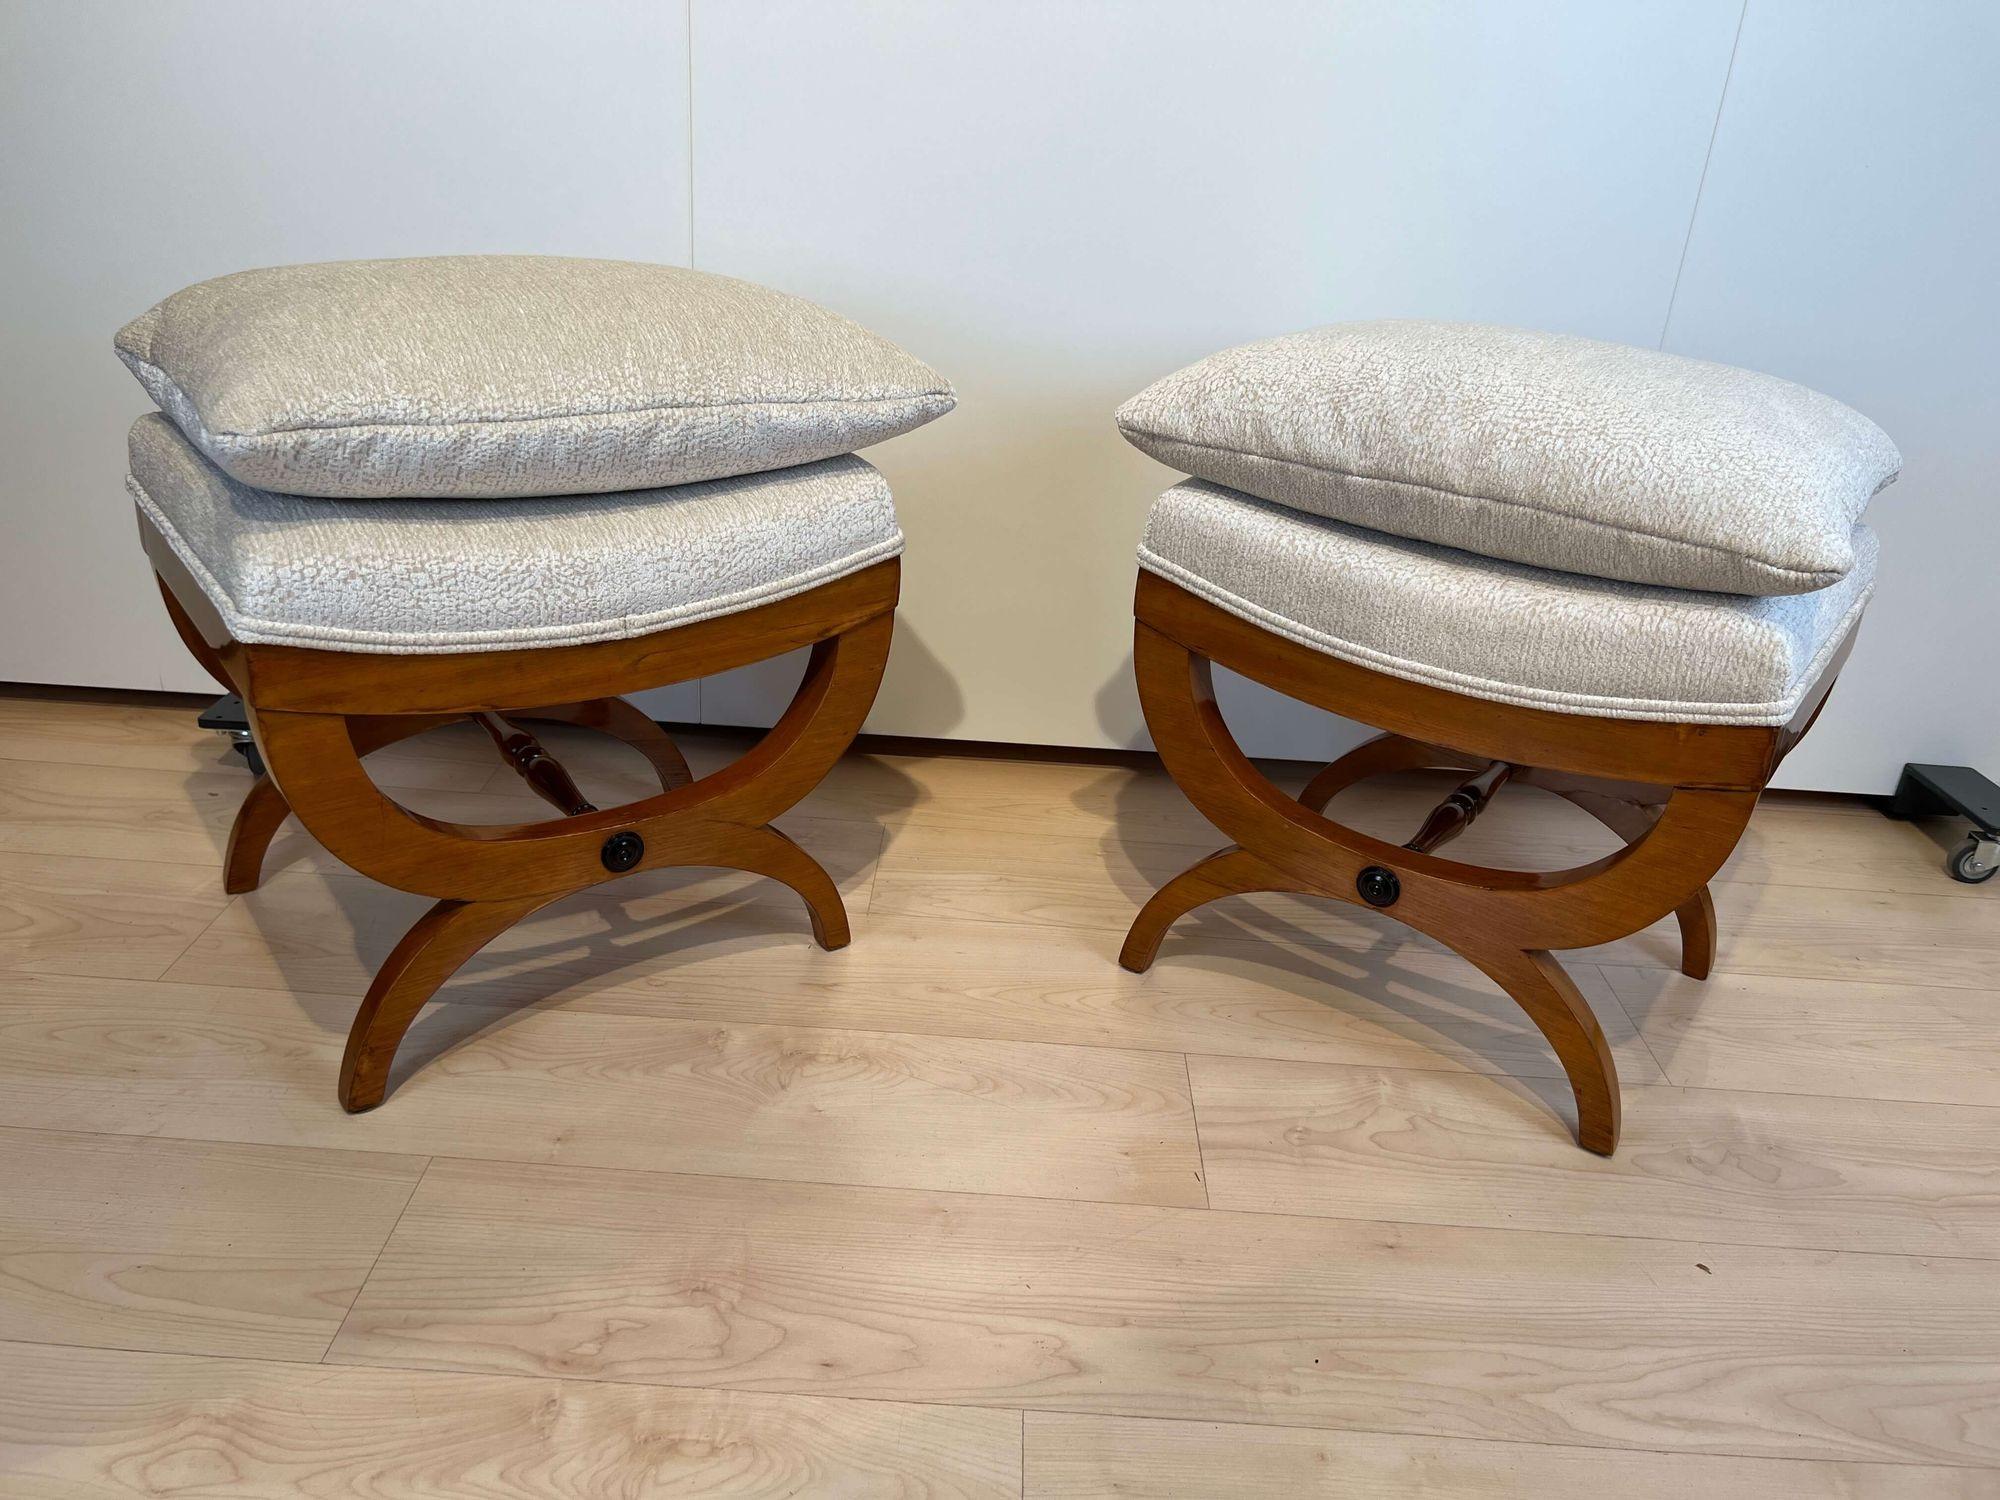 Pair of Large Tabourets, Beech Wood, France, circa 1860 For Sale 9